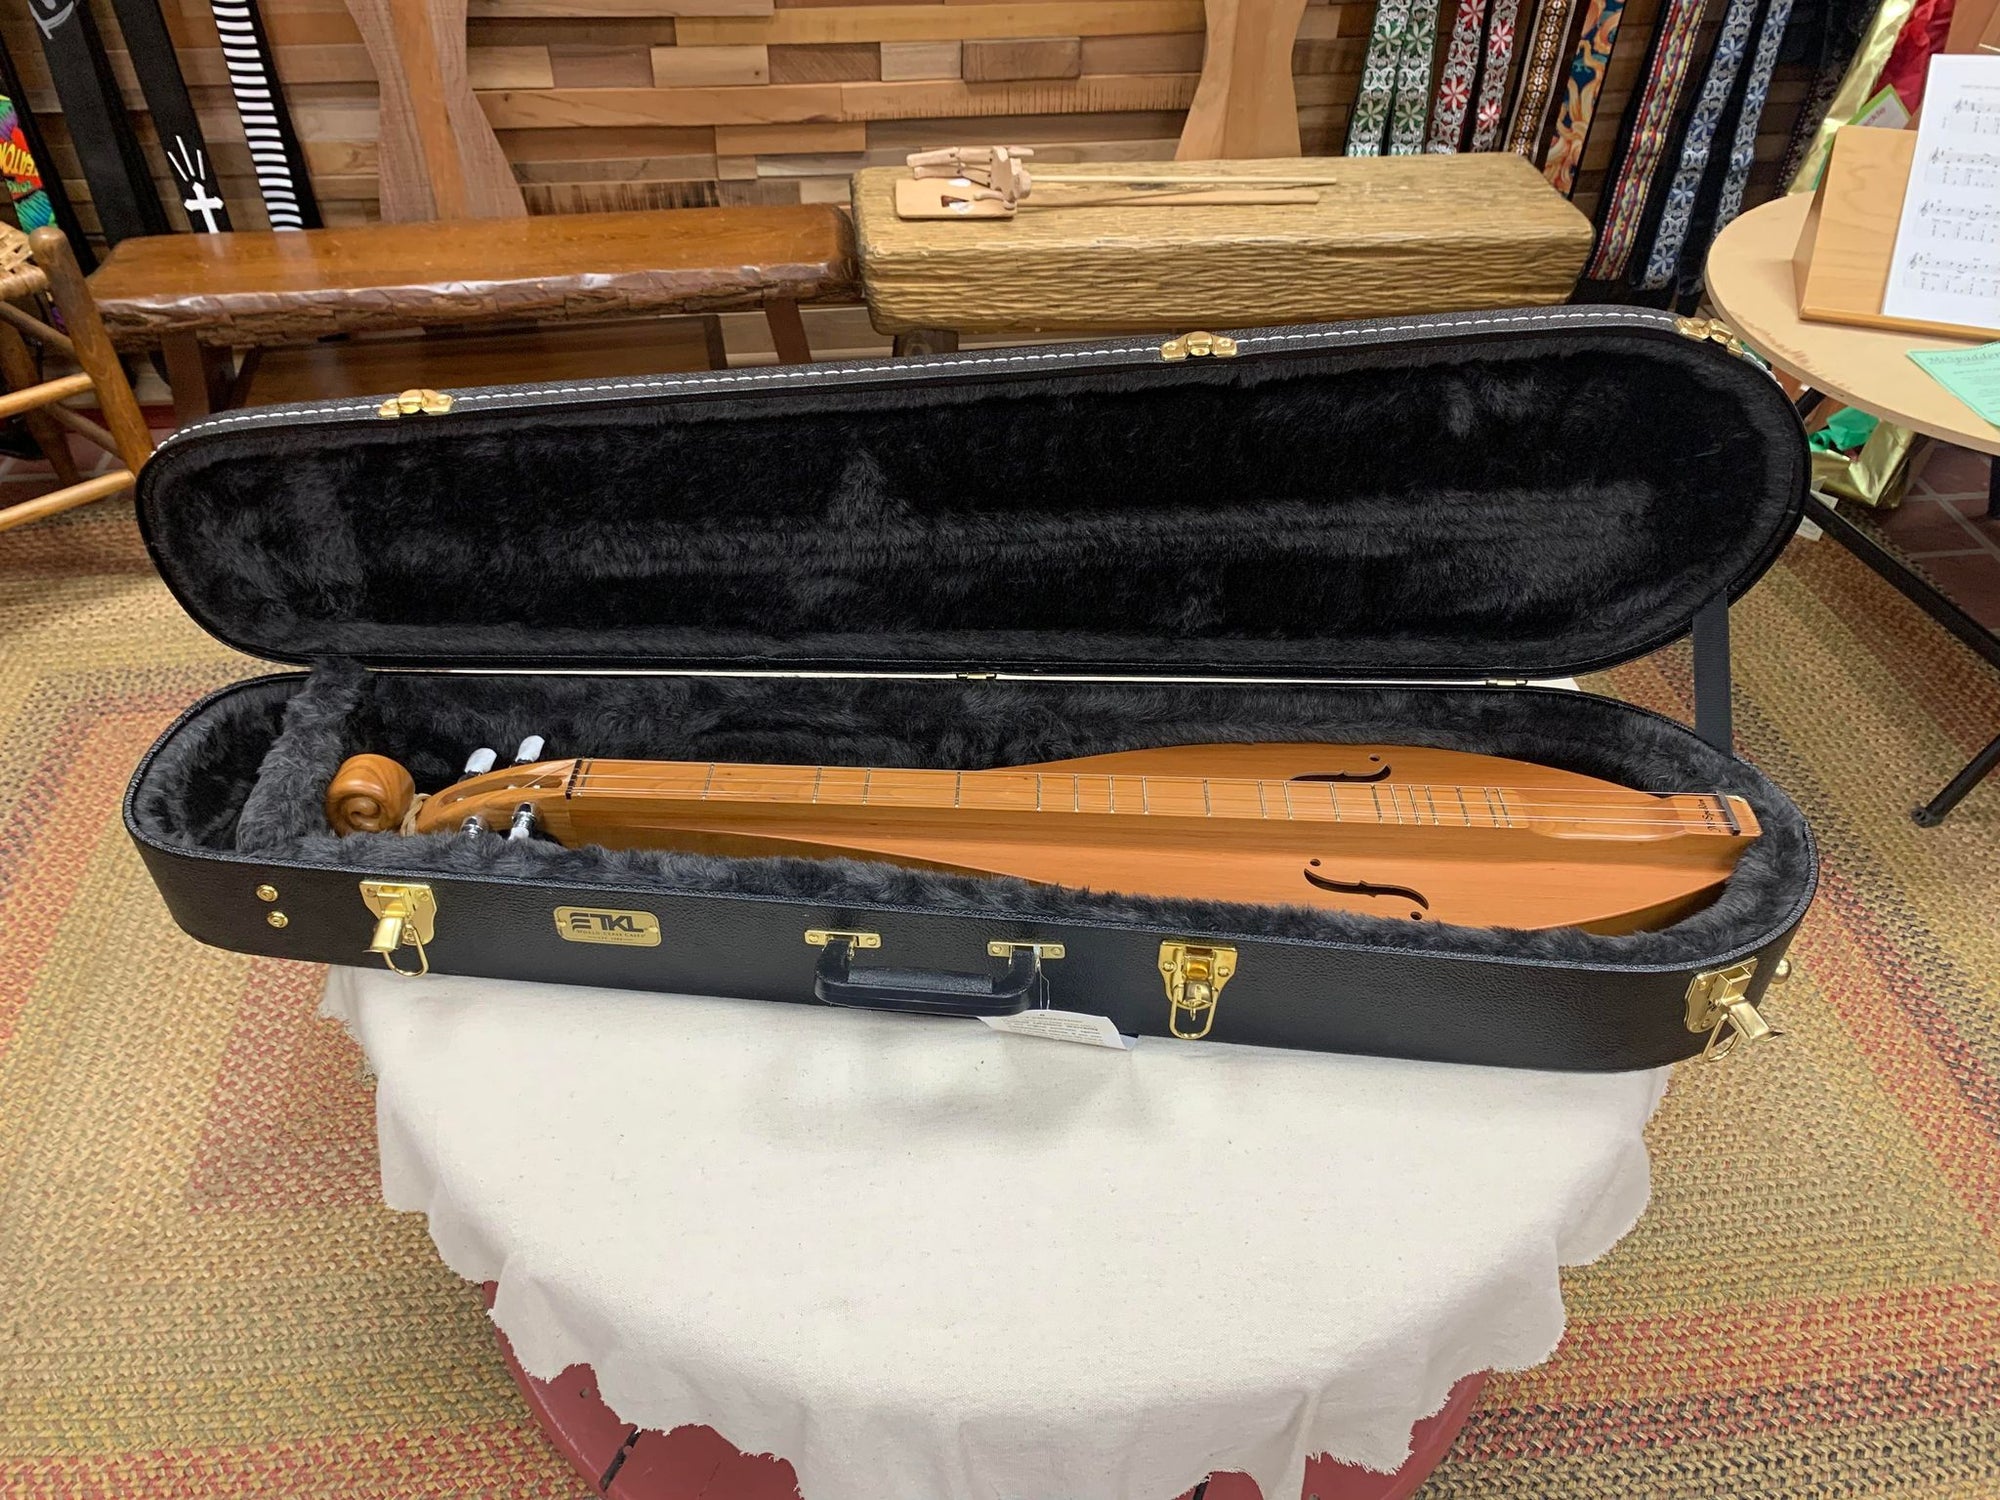 A Premier Dulcimer Hardshell Case with a lute inside of it, featuring a Hardwood Shell and Limited Lifetime Warranty.